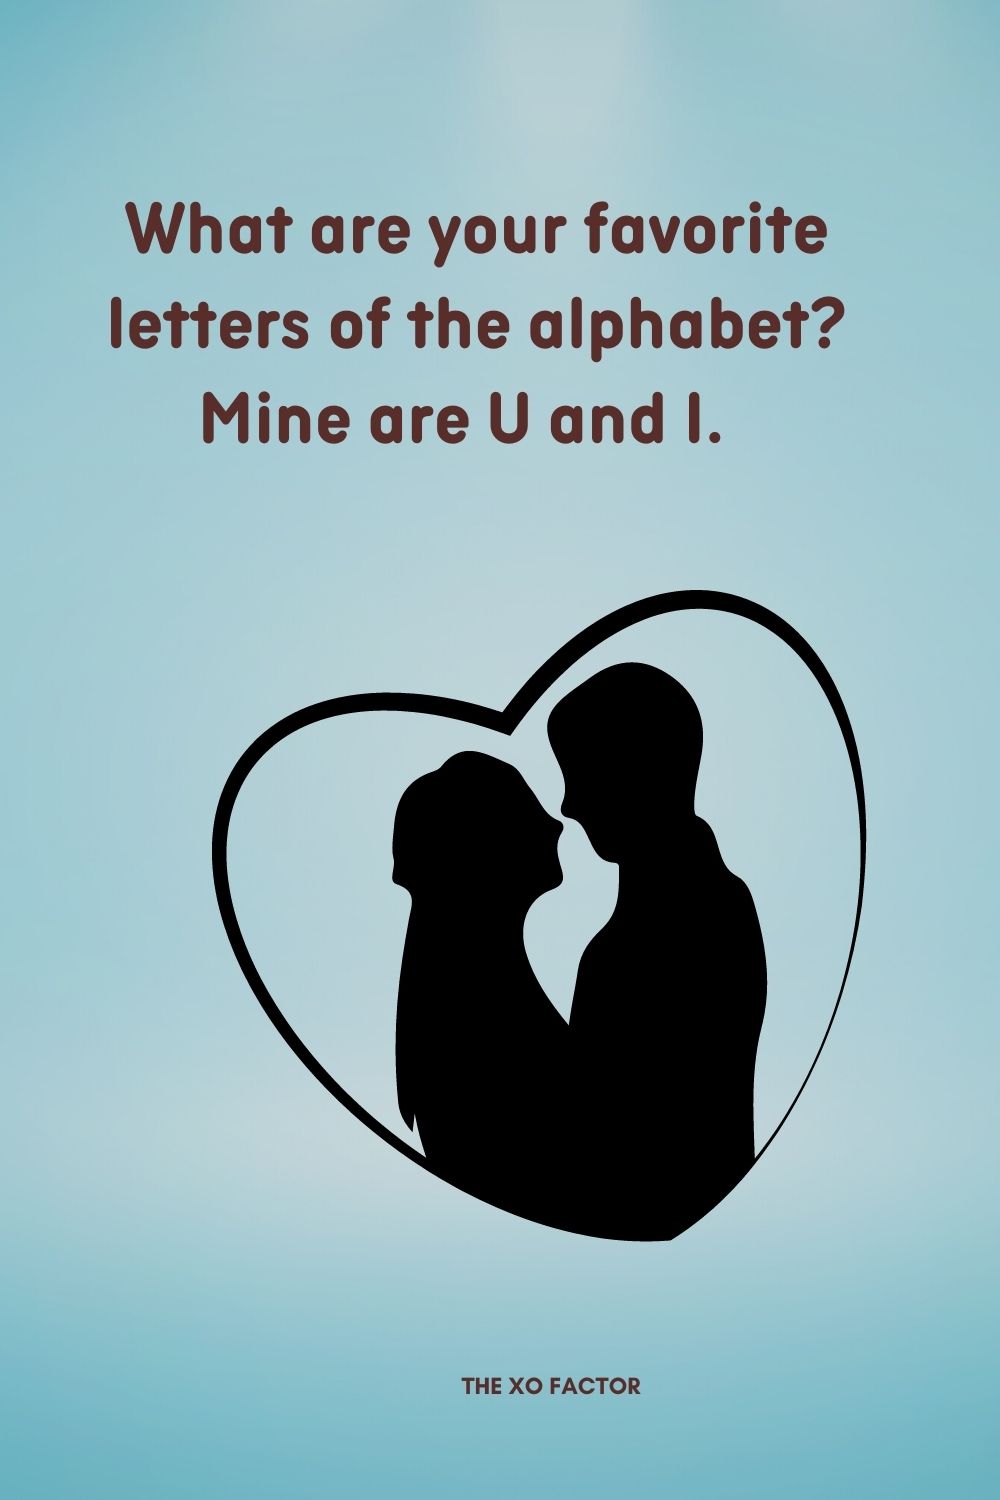 What are your favorite letters of the alphabet? Mine are U and I. 